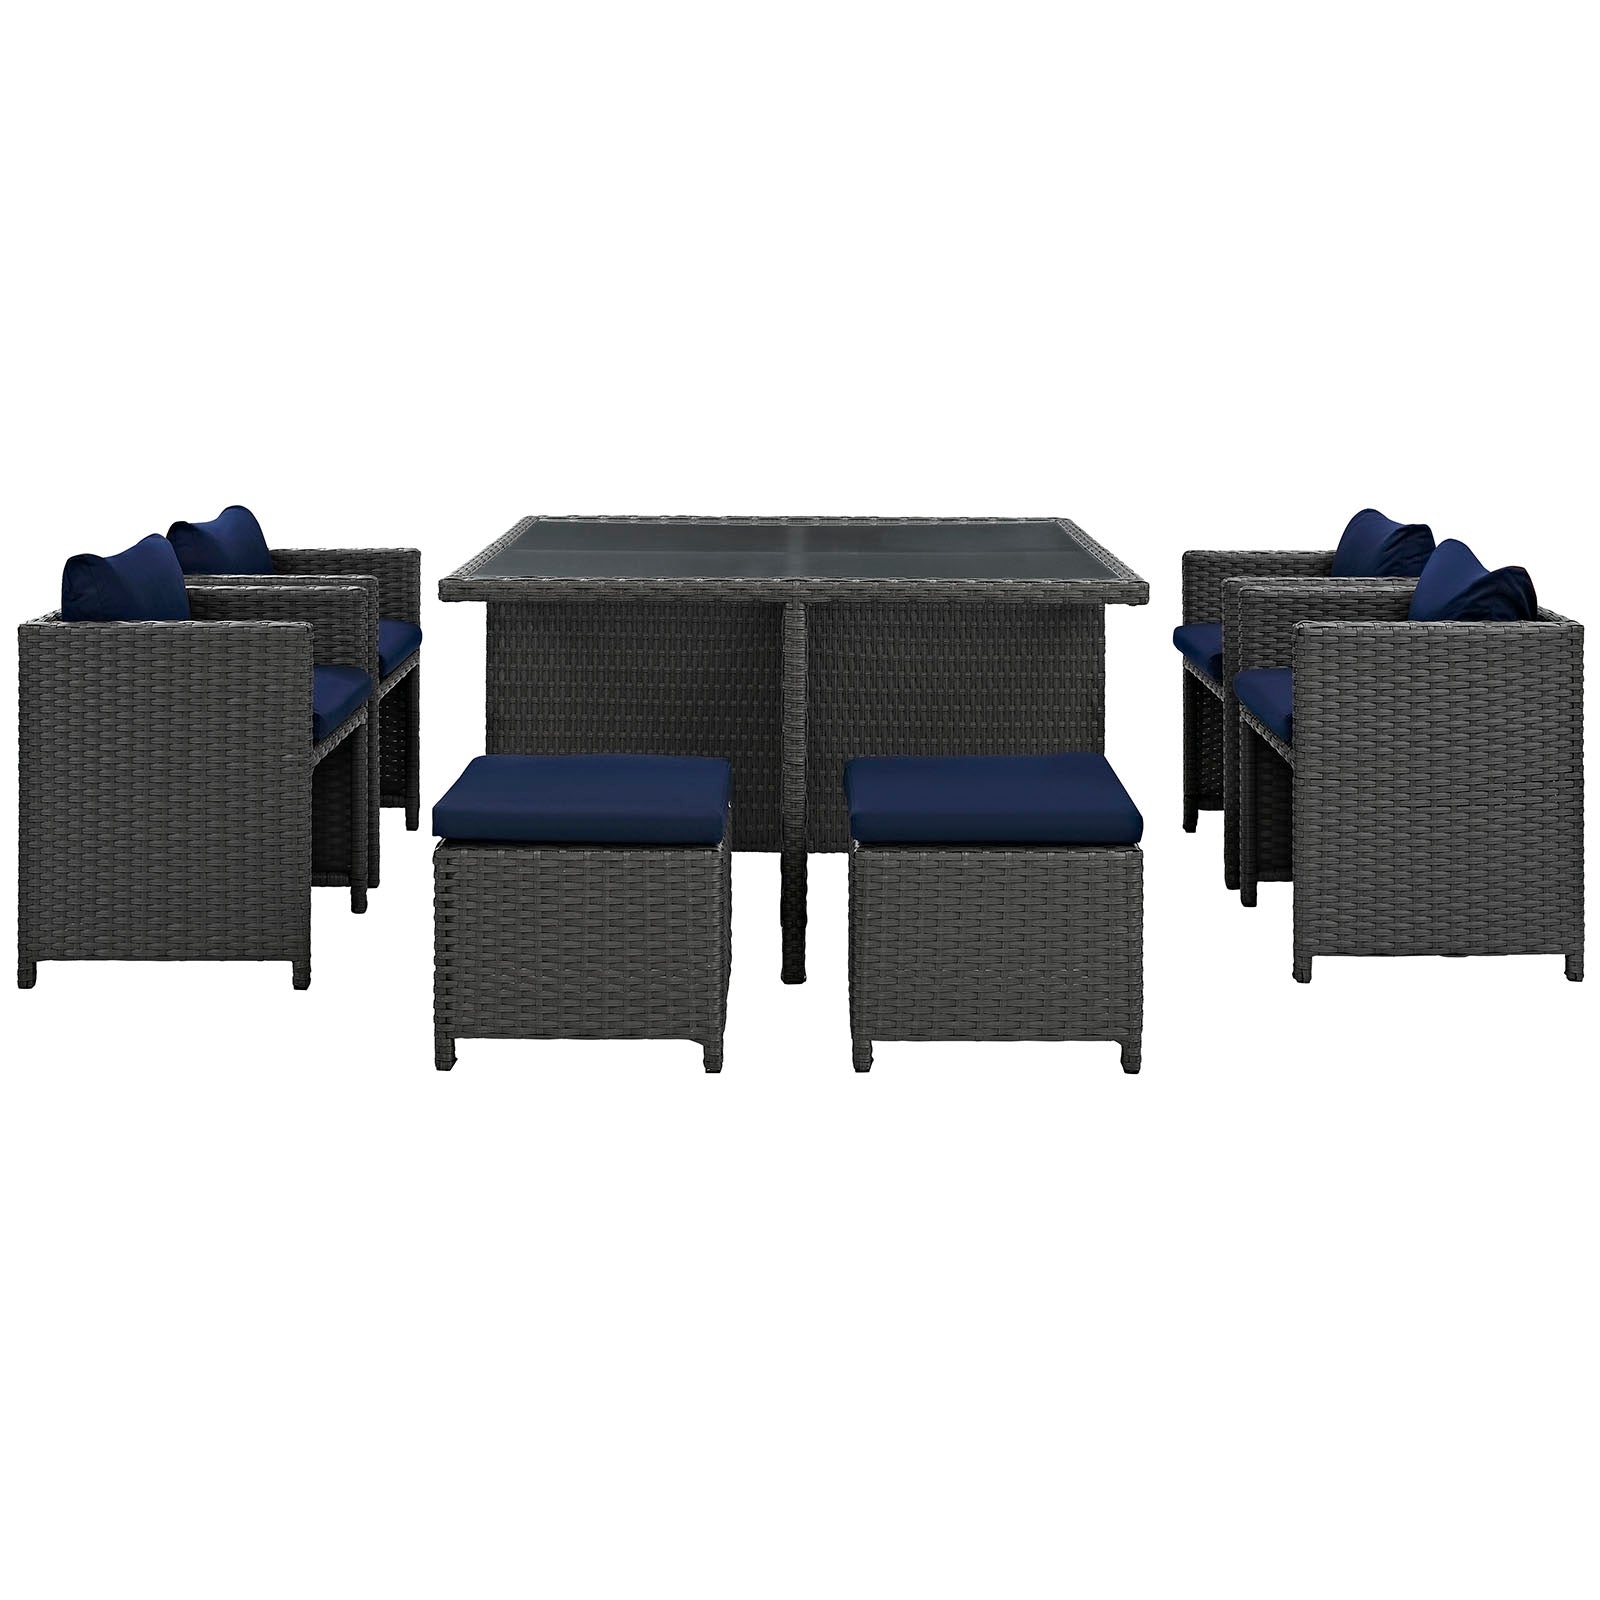 Modway Outdoor Dining Sets - Sojourn 9 Piece Outdoor Patio Dining Set Canvas Navy